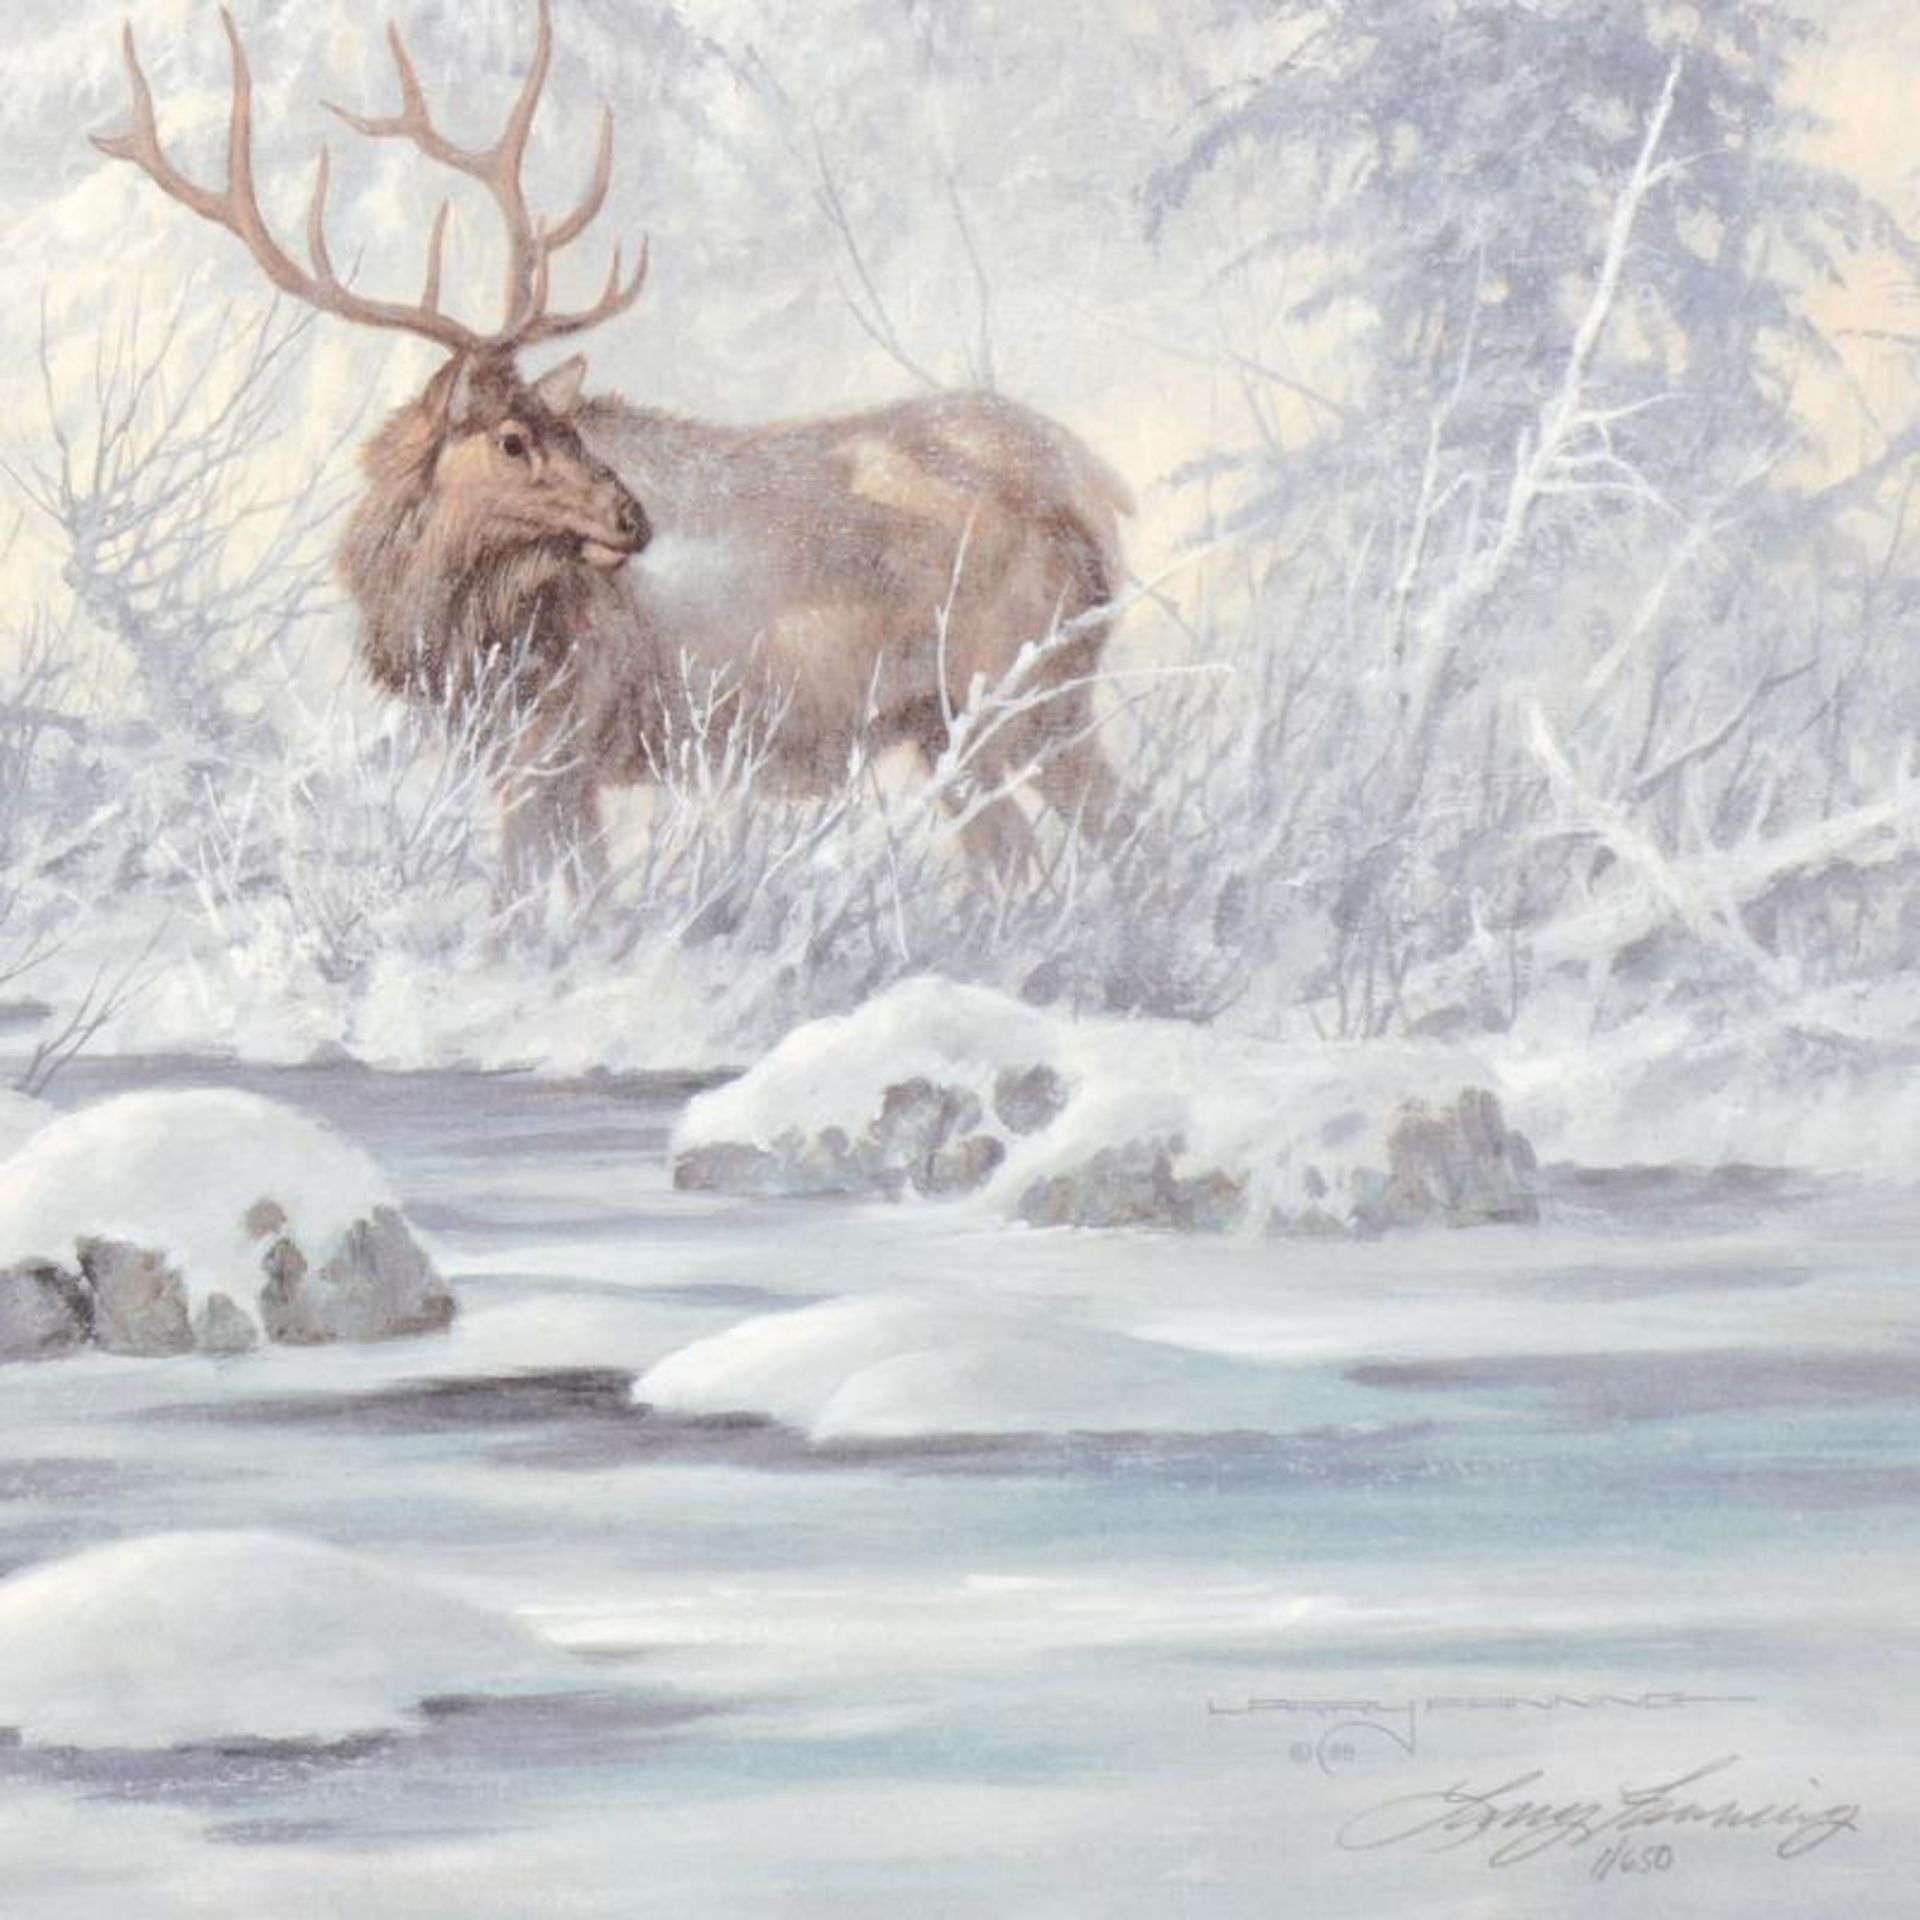 Larry Fanning (1938-2014), "Solstice Rendezvous - Elk" Limited Edition Lithograp - Image 3 of 3